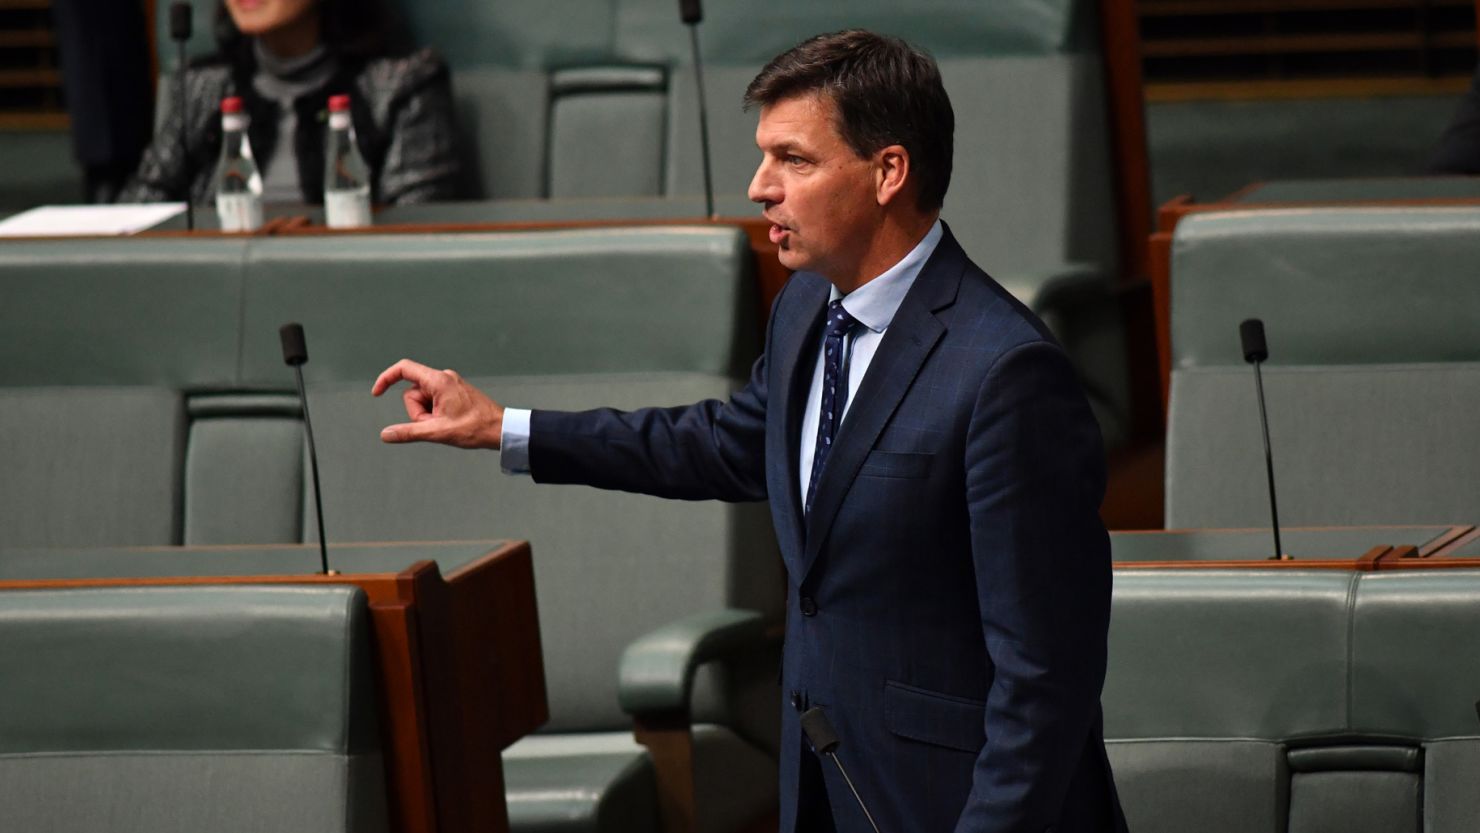 Minister for Energy Angus Taylor during Question Time in the House of Representatives at Parliament House on May 13, 2020 in Canberra, Australia.